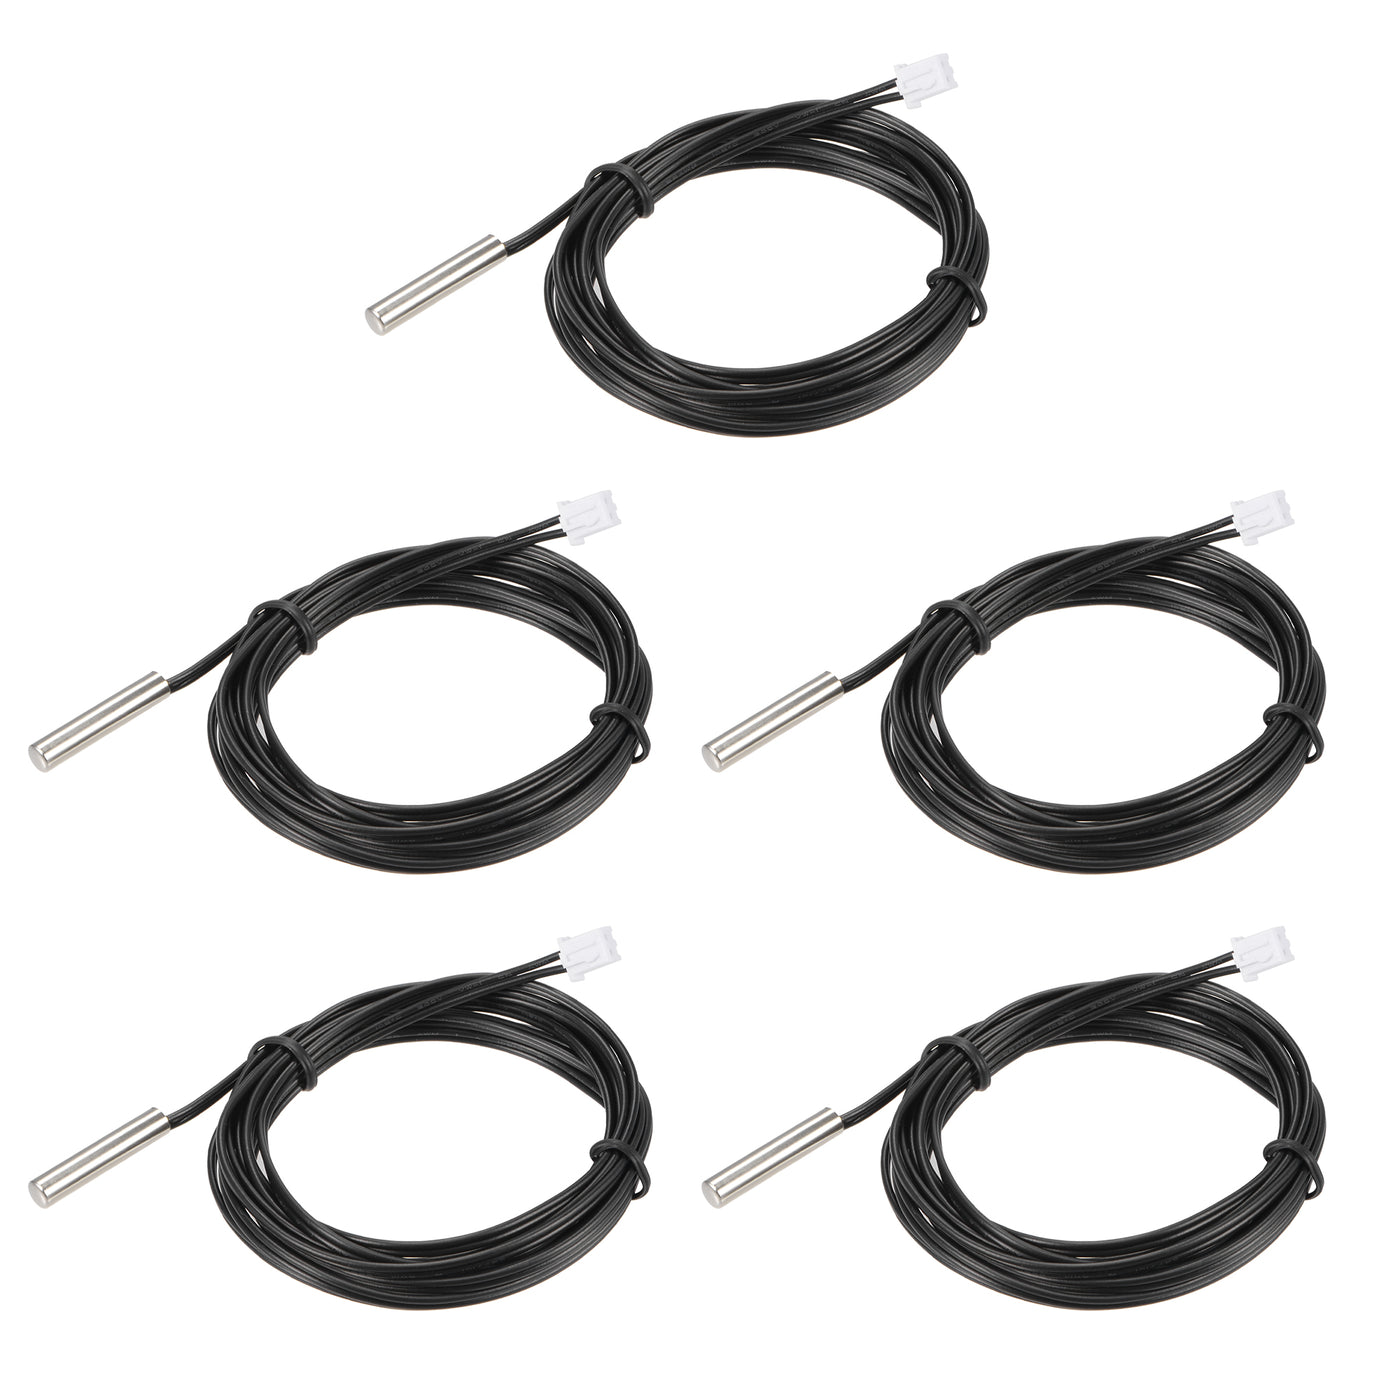 uxcell Uxcell 5pcs 10K Temperature Sensor Probe, Stainless Steel NTC Thermal Sensor Probe 6.6ft Digital Thermometer Extension Cable